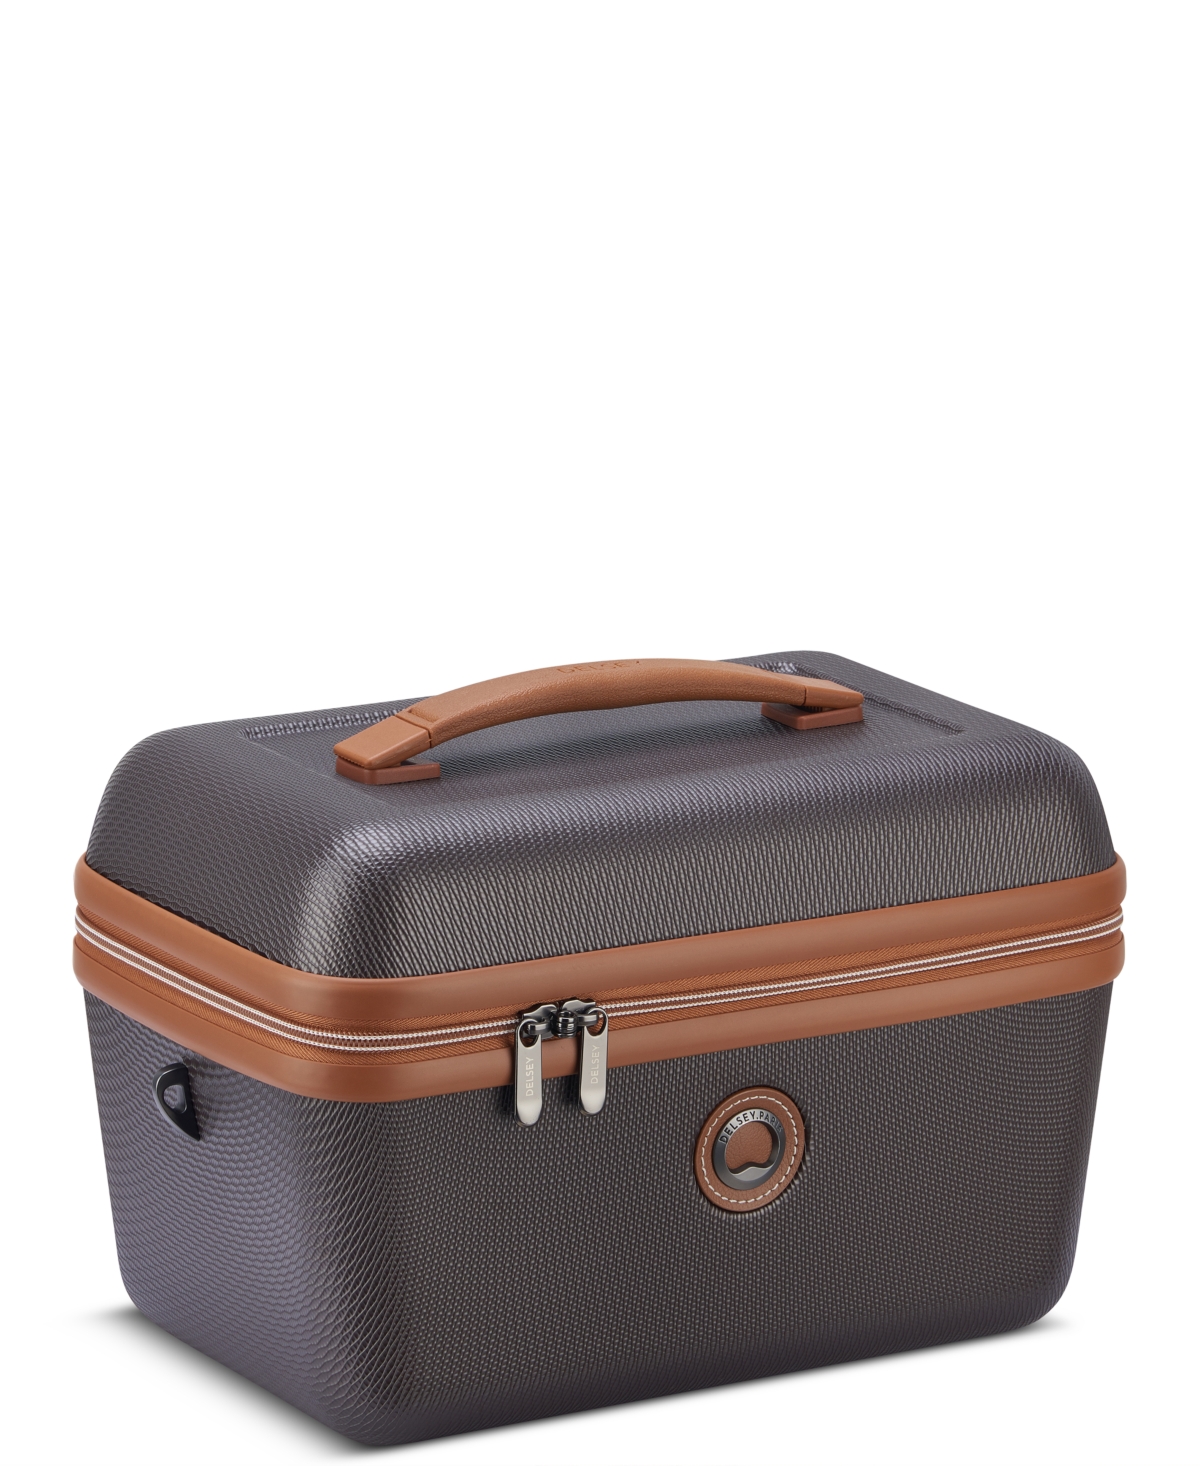 Delsey Chatelet Air Beauty Case In Chocolate